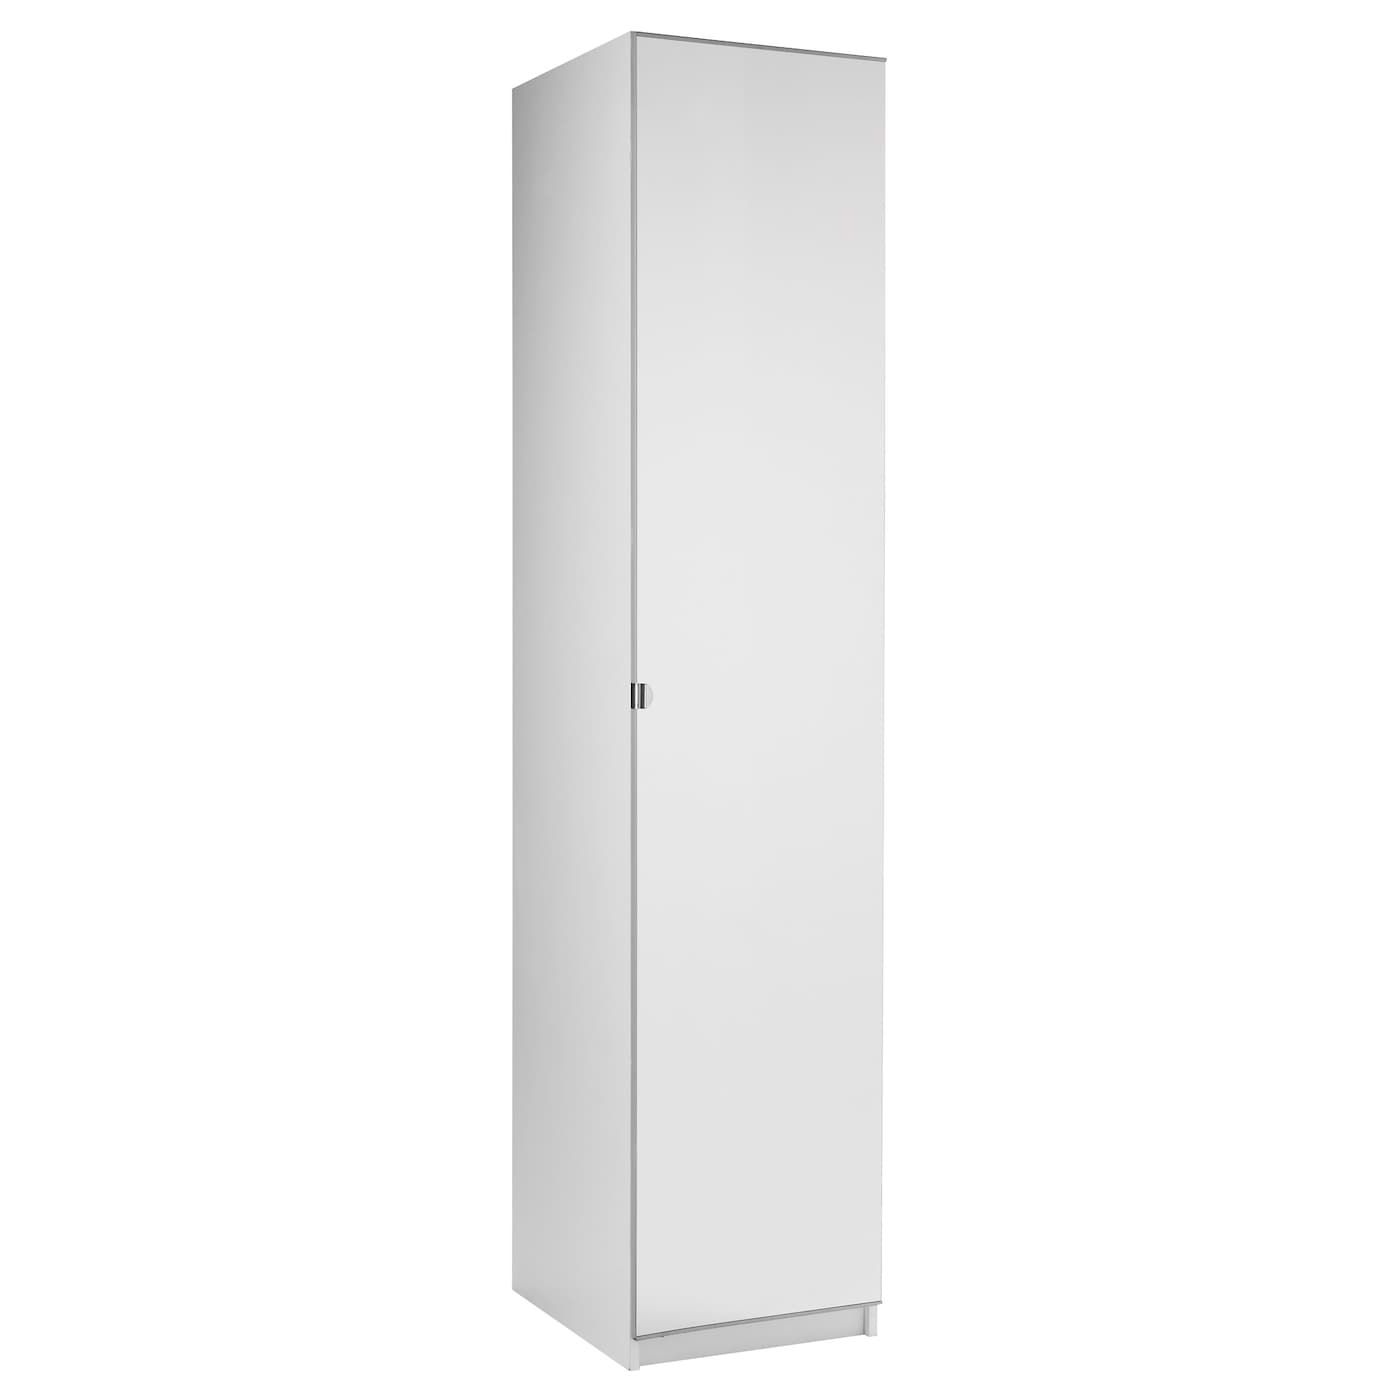 Pax / Vikedal Wardrobe With 1 Door, White/mirror Glass, 50x60x236 Cm – Ikea Within One Door Mirrored Wardrobes (View 3 of 20)